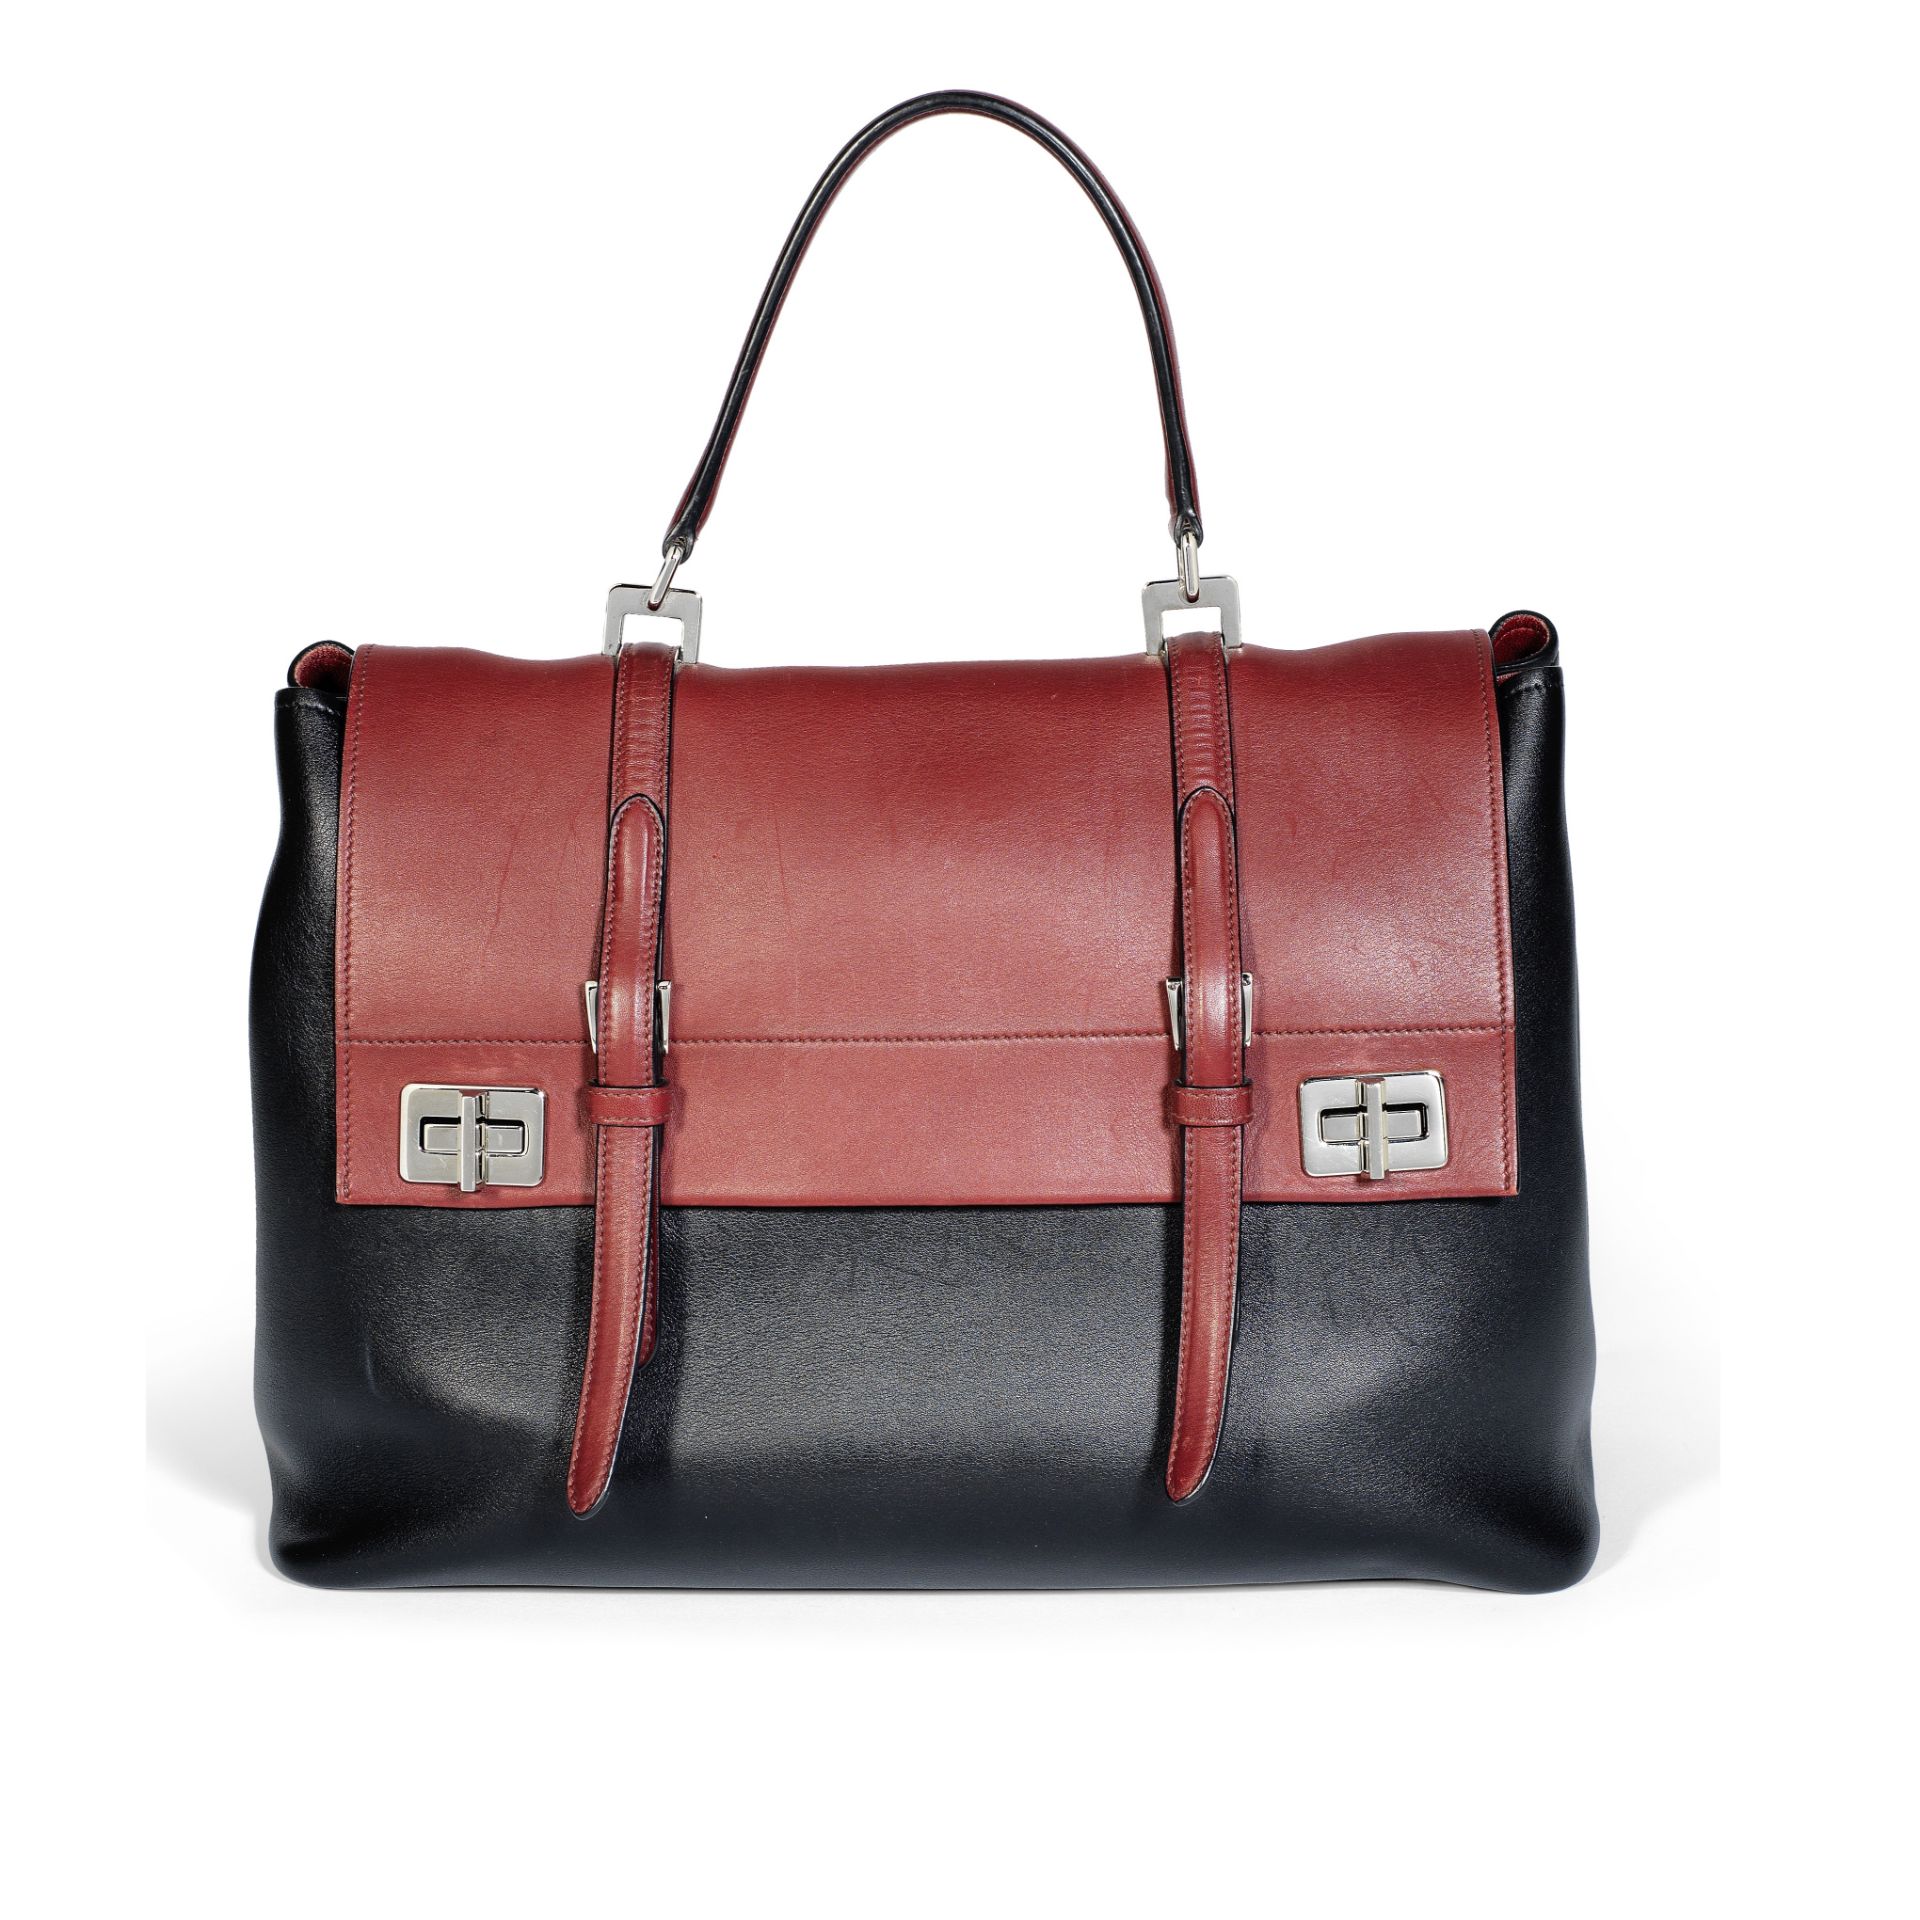 Black and Red Calf City Satchel, Prada, c. 2014, (Includes authenticity card and dust bag)